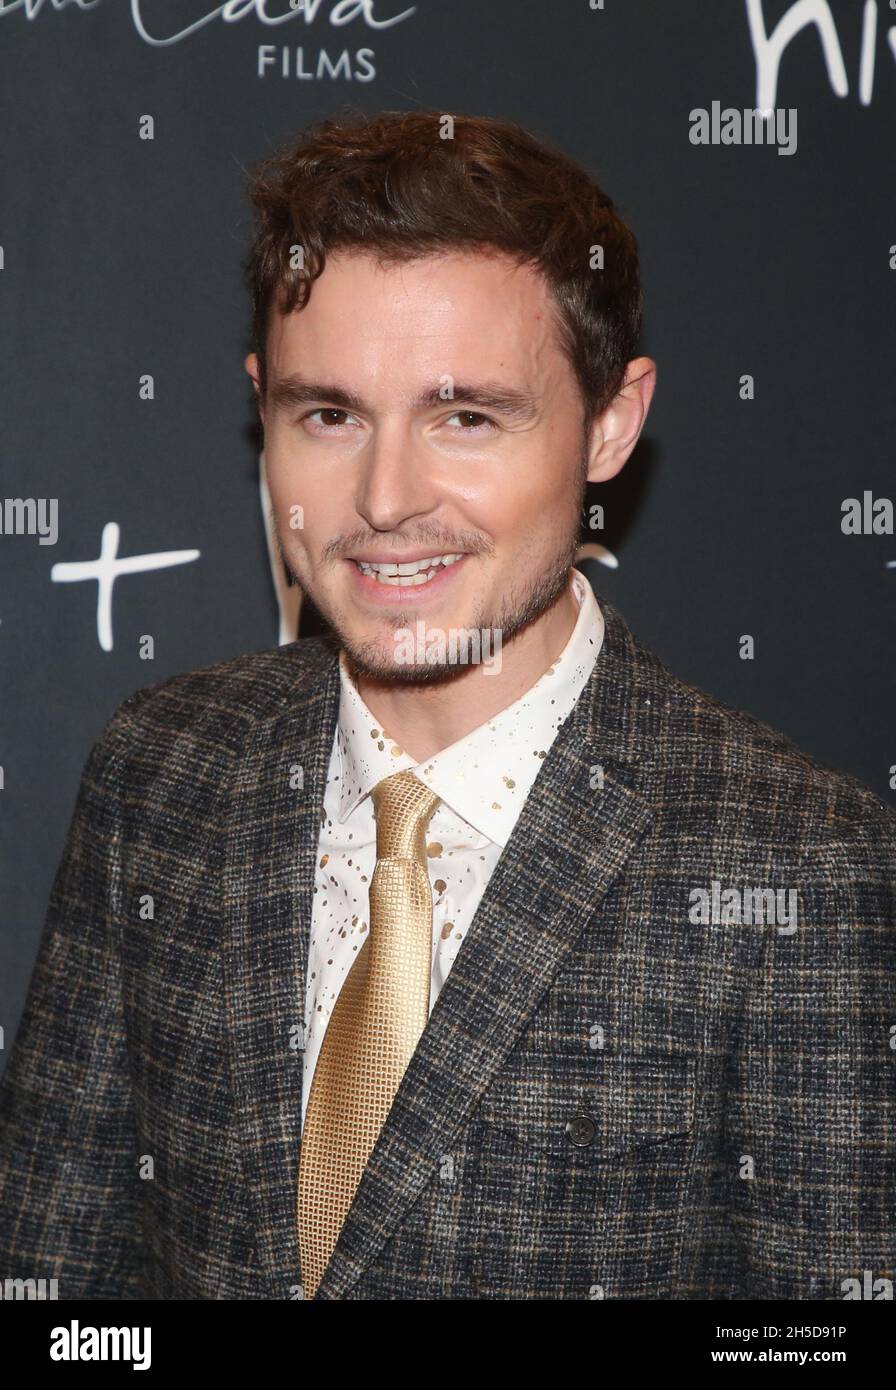 Los Angeles, Ca. 8th Nov, 2021. Callan McAuliffe at the premiere of Him And  Her at The Landmark Theater in Los Angeles, California on November 8, 2021.  Credit: Faye Sadou/Media Punch/Alamy Live